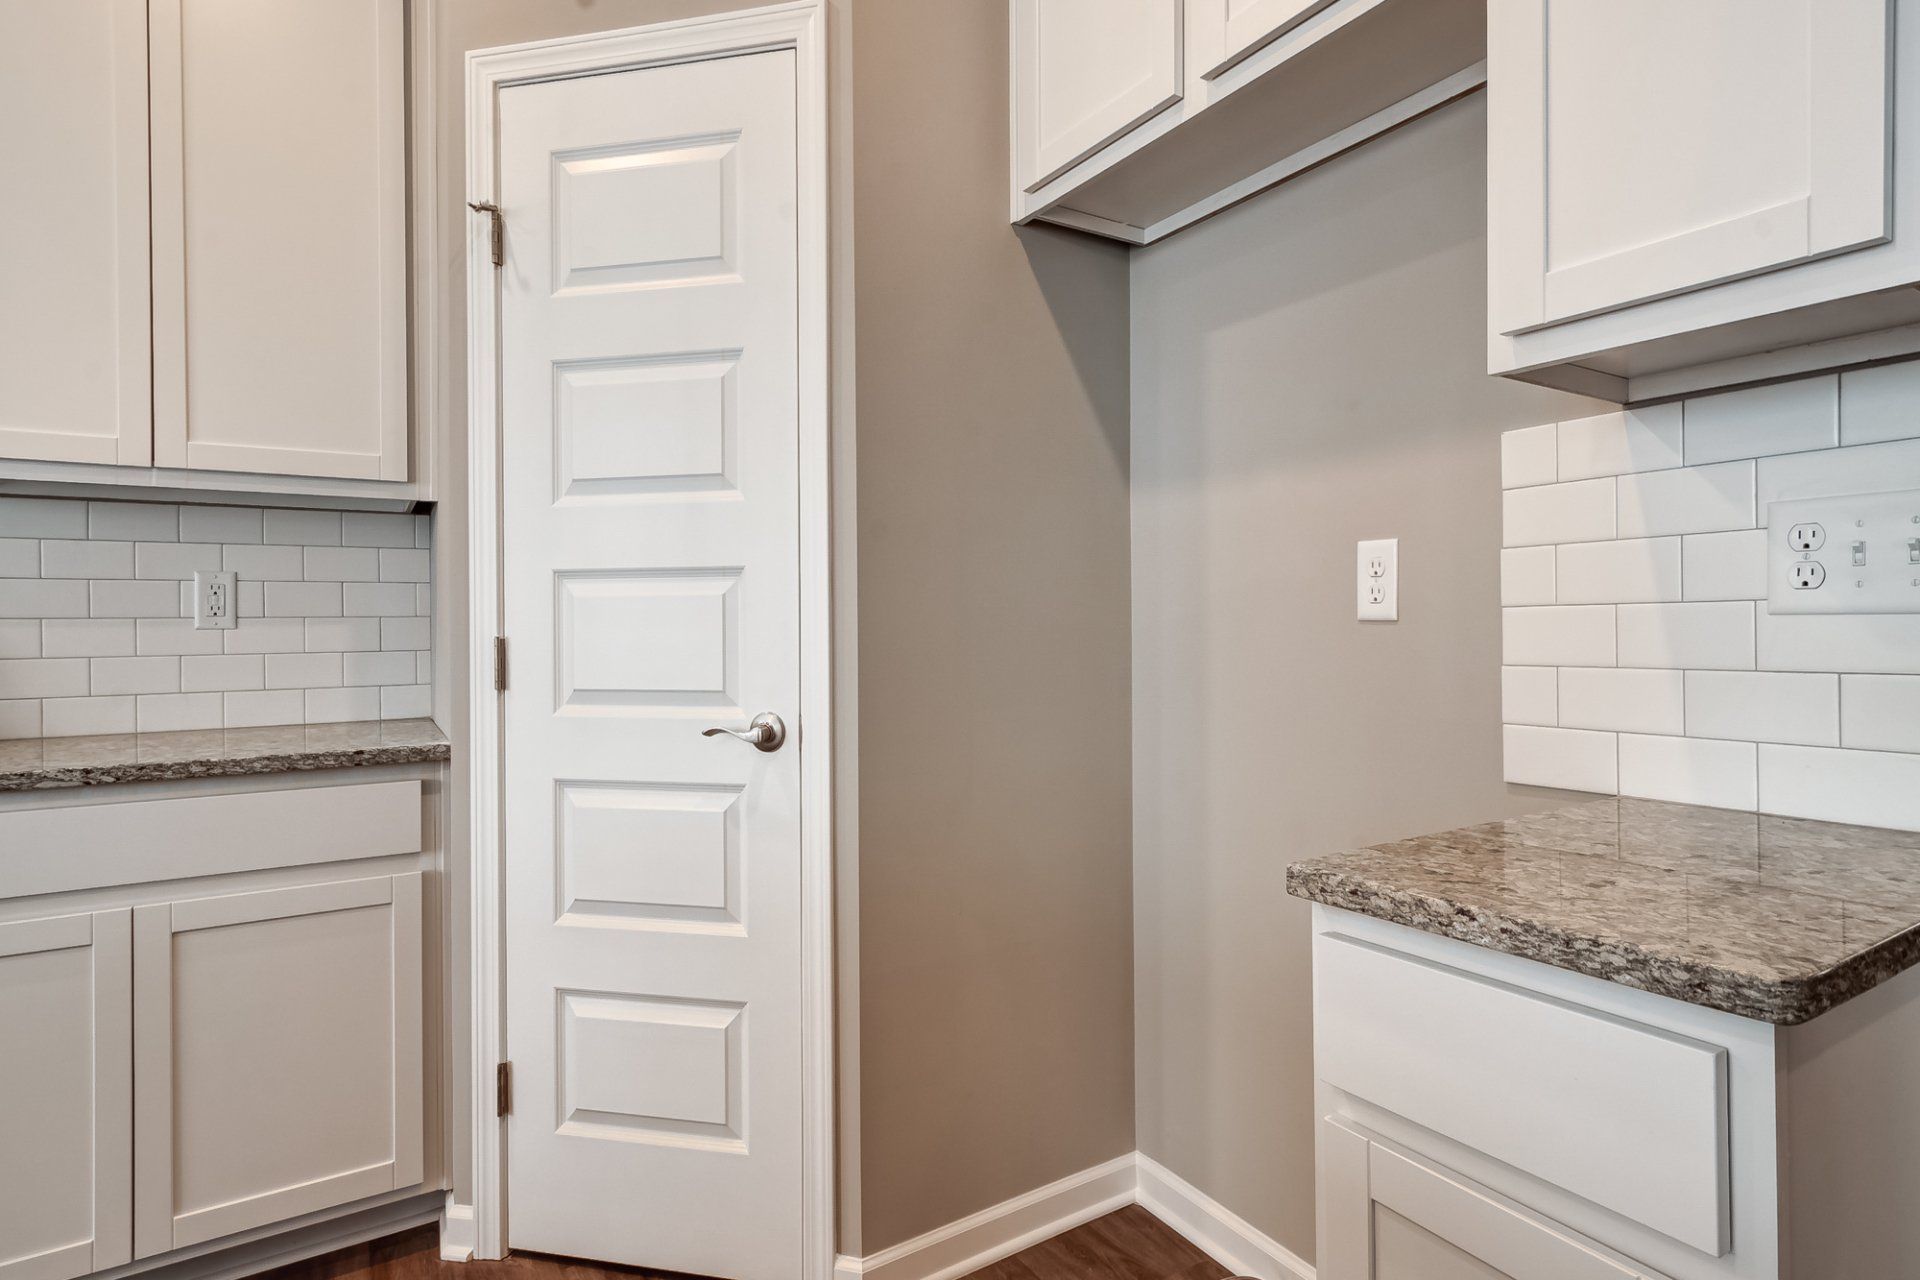 Pantry Door and Place for Fridge